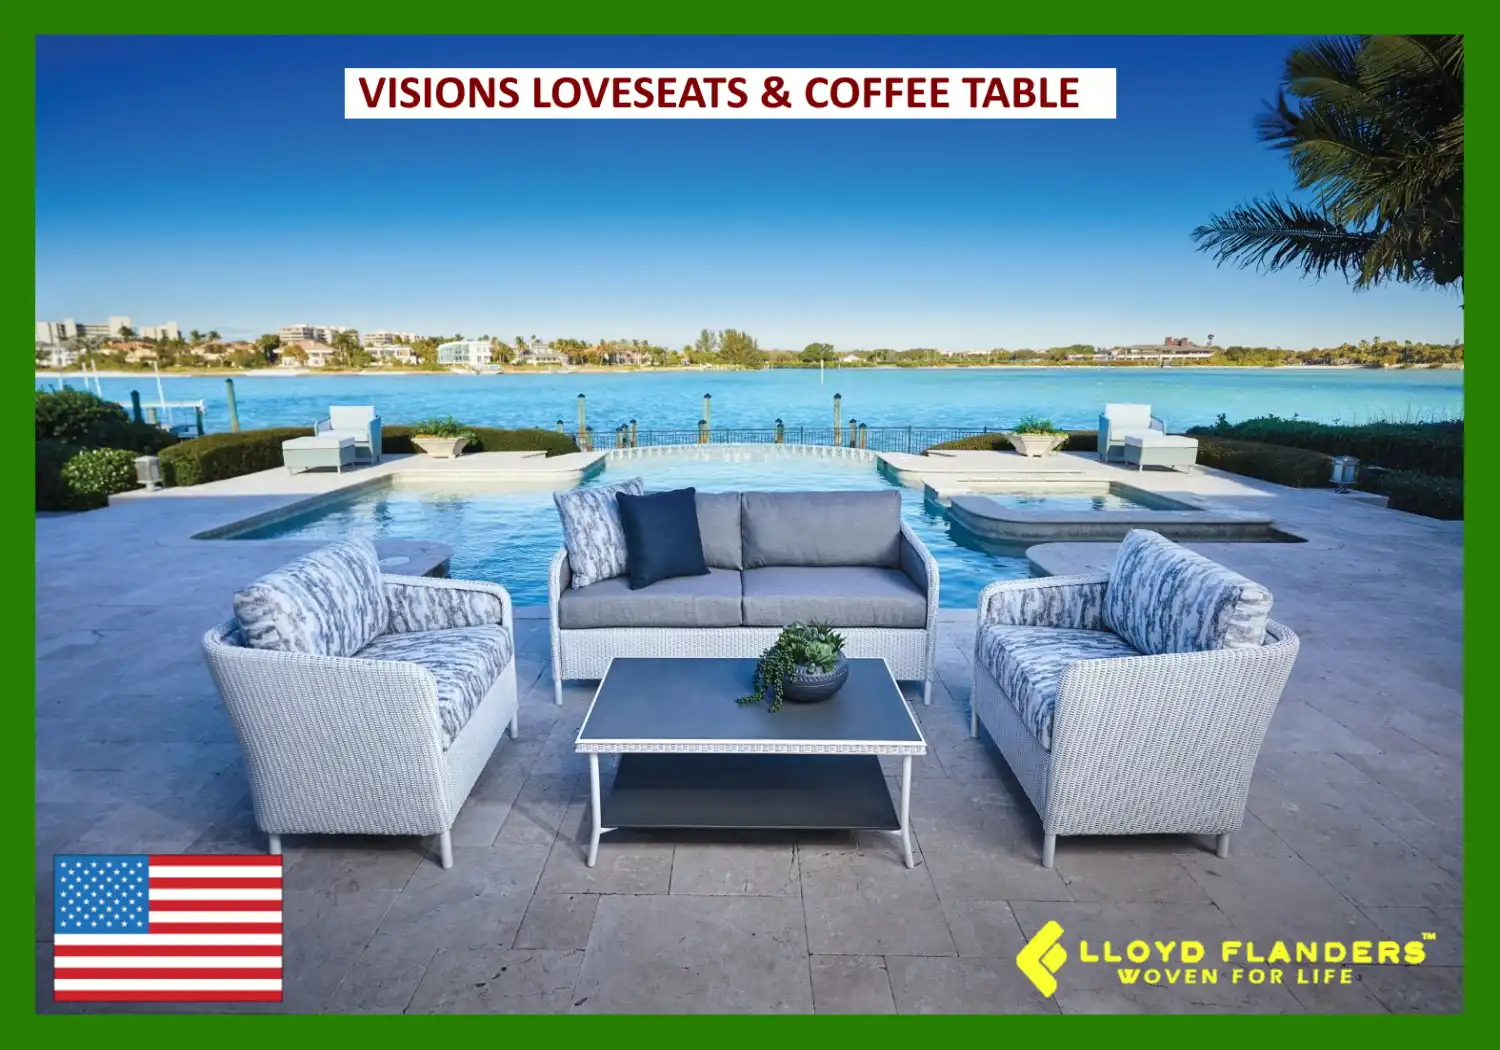 VISIONS LOVESEATS & COFFEE TABLE